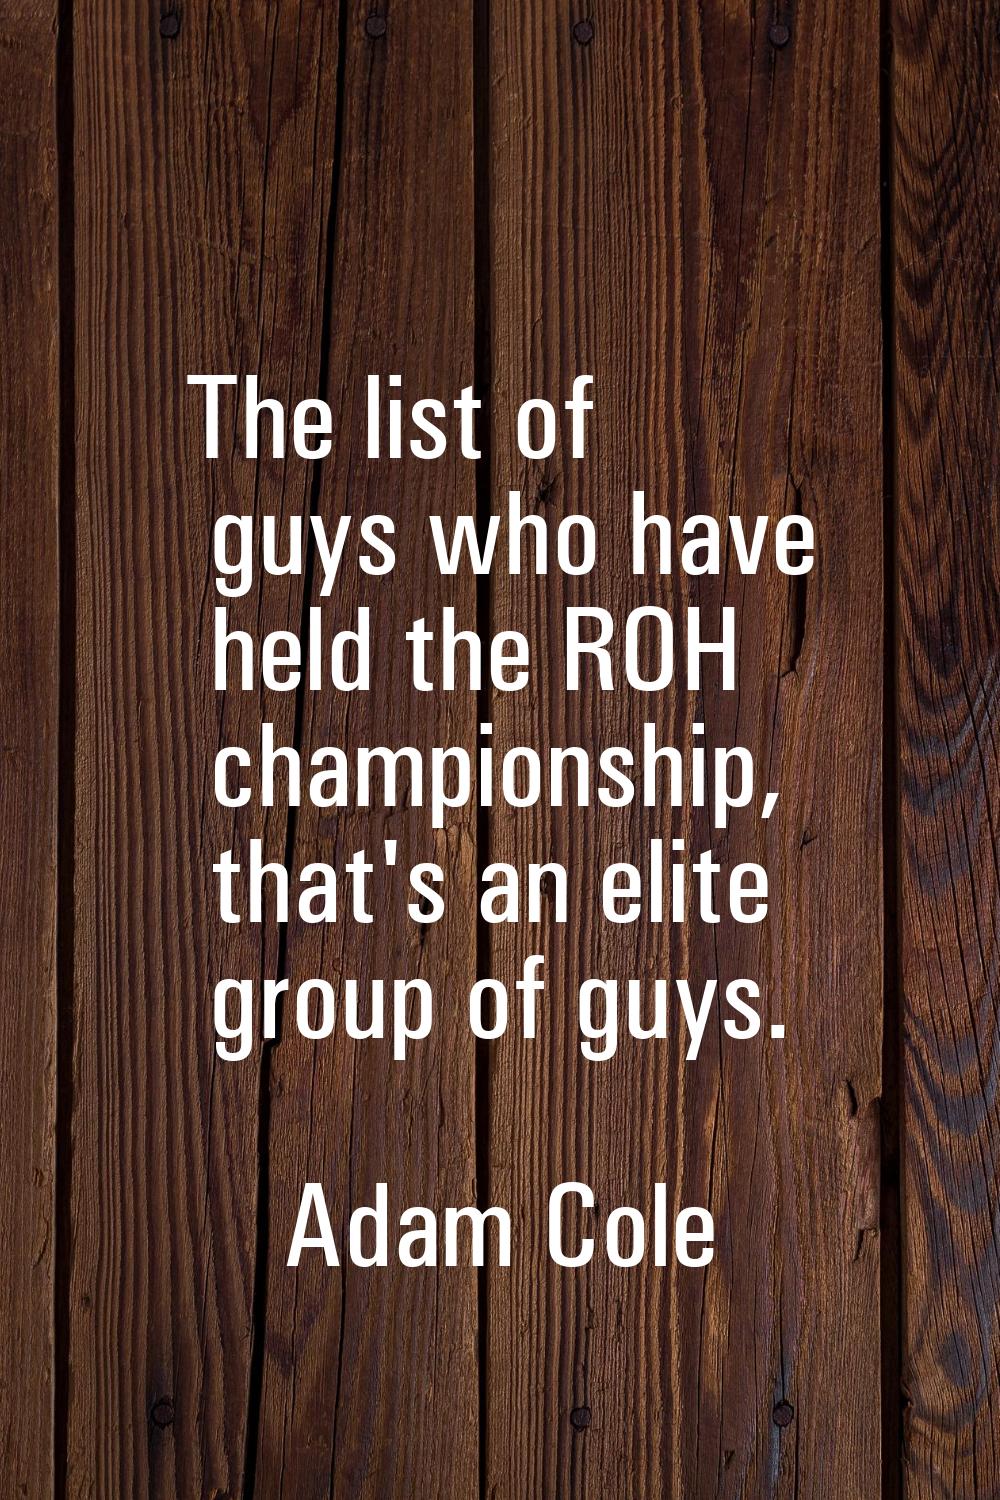 The list of guys who have held the ROH championship, that's an elite group of guys.